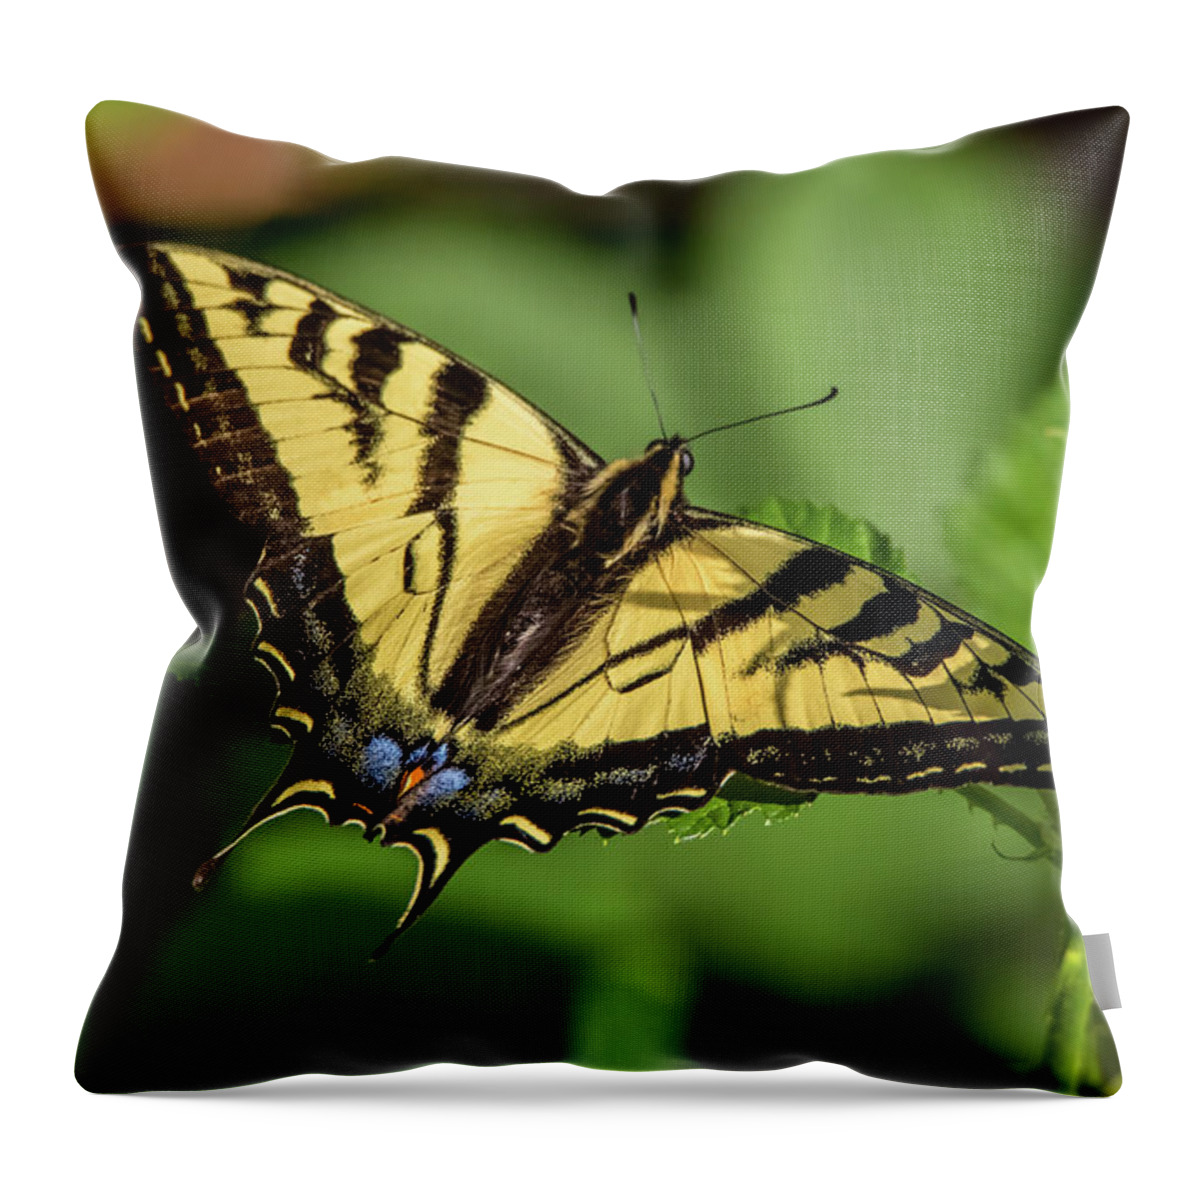 California Throw Pillow featuring the photograph Swallowtail Butterfly on a Leaf by Marc Crumpler